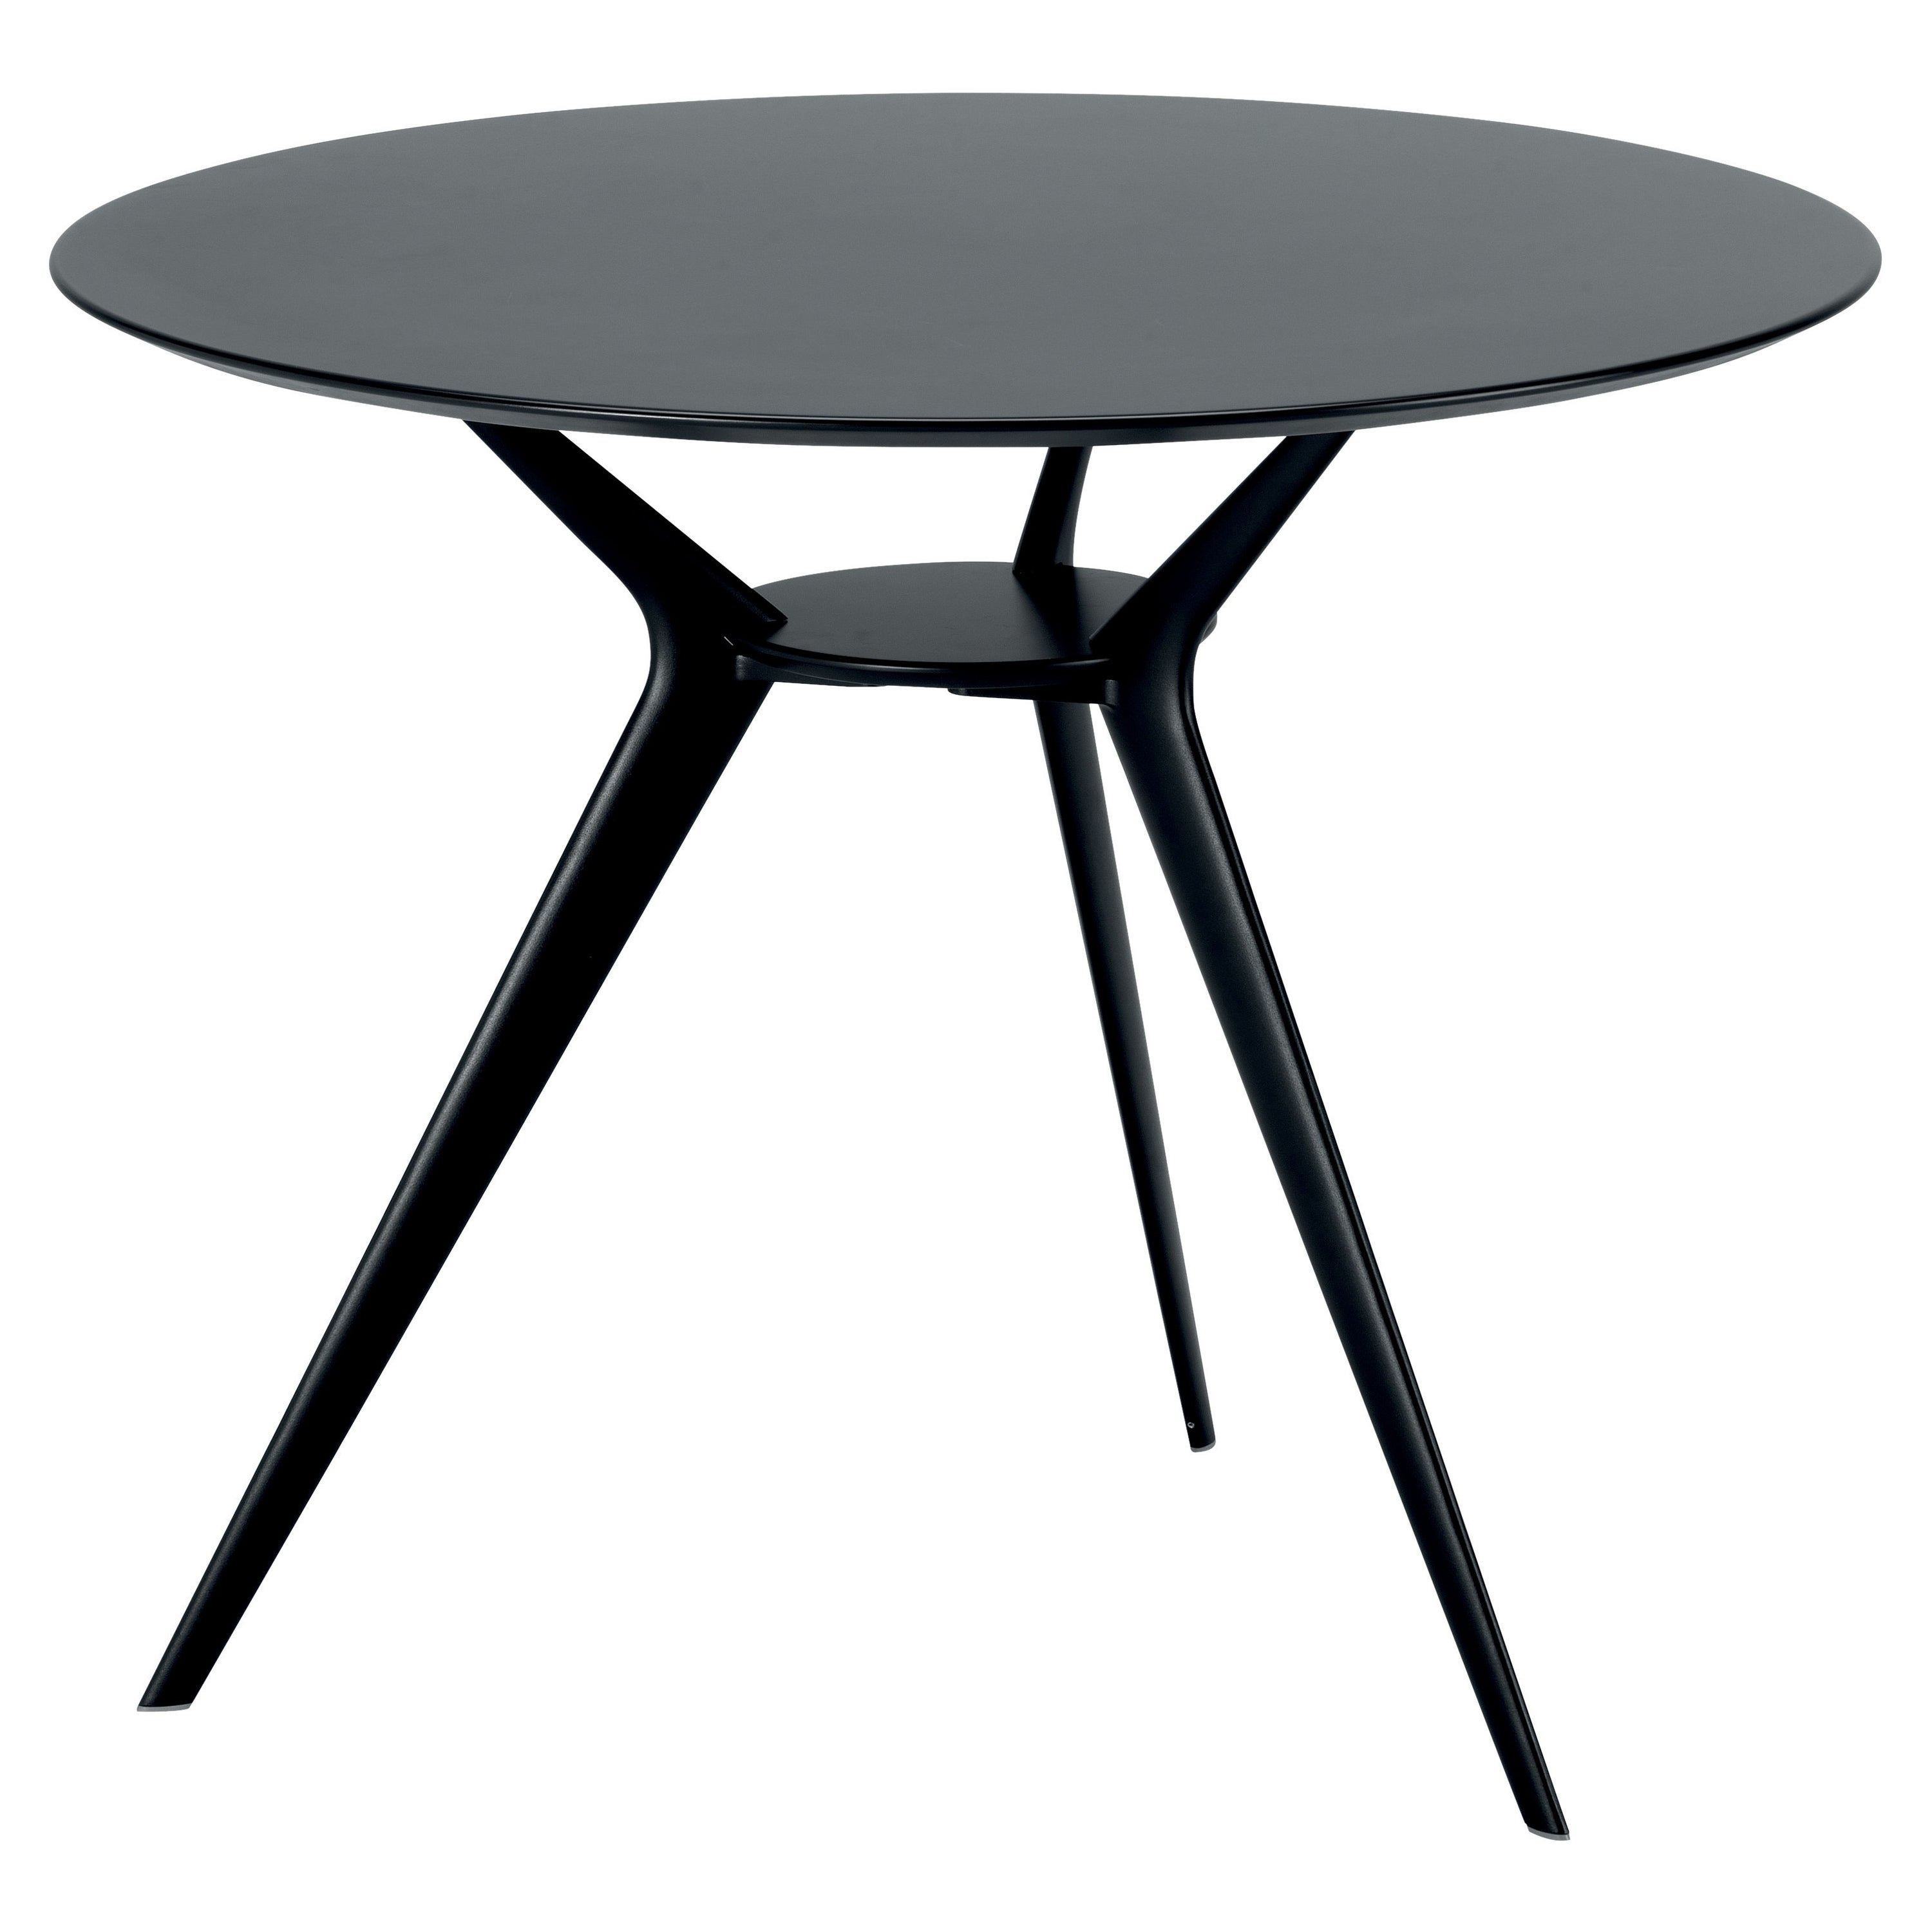 Alias Biplane 401 Table in Black MDF Top with Black Lacquered Aluminium Frame For Sale